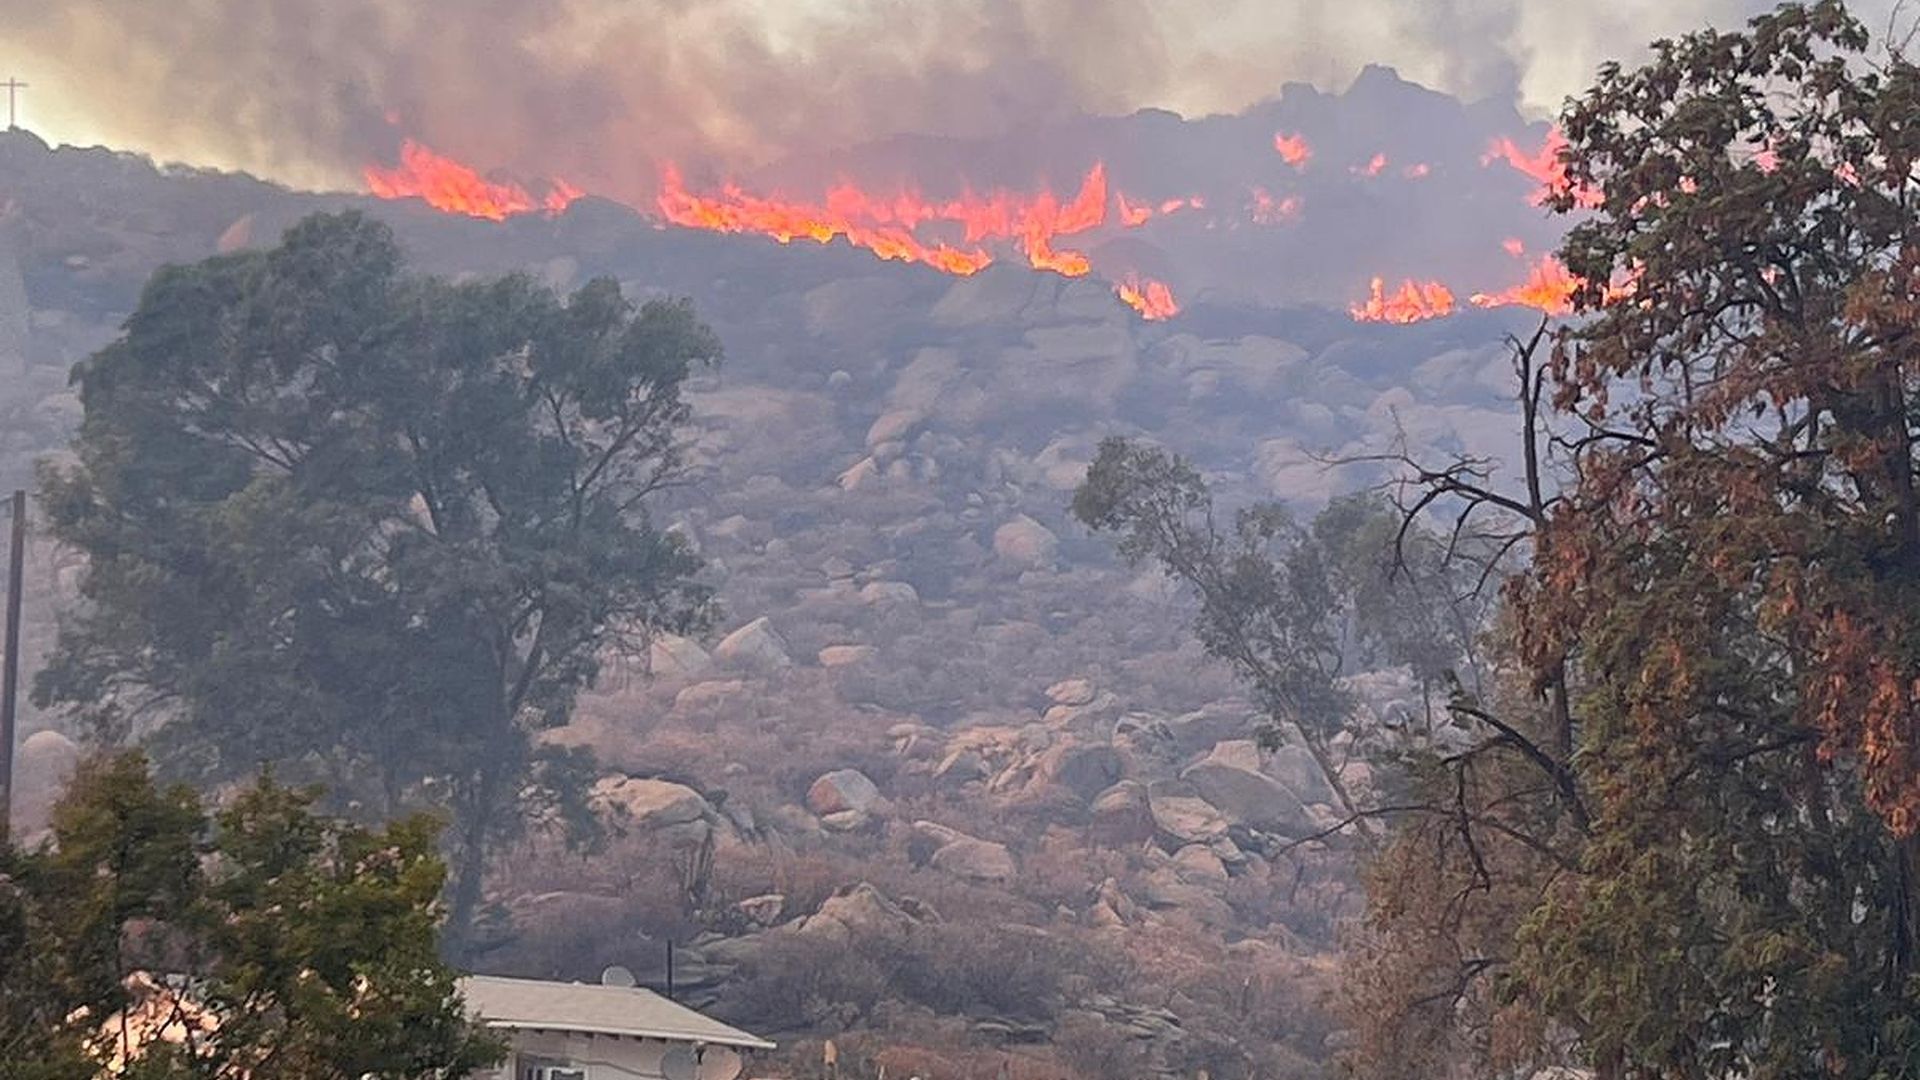 A photo of the Mill Fire that's killed at least 2 people in California as of Monday evening.